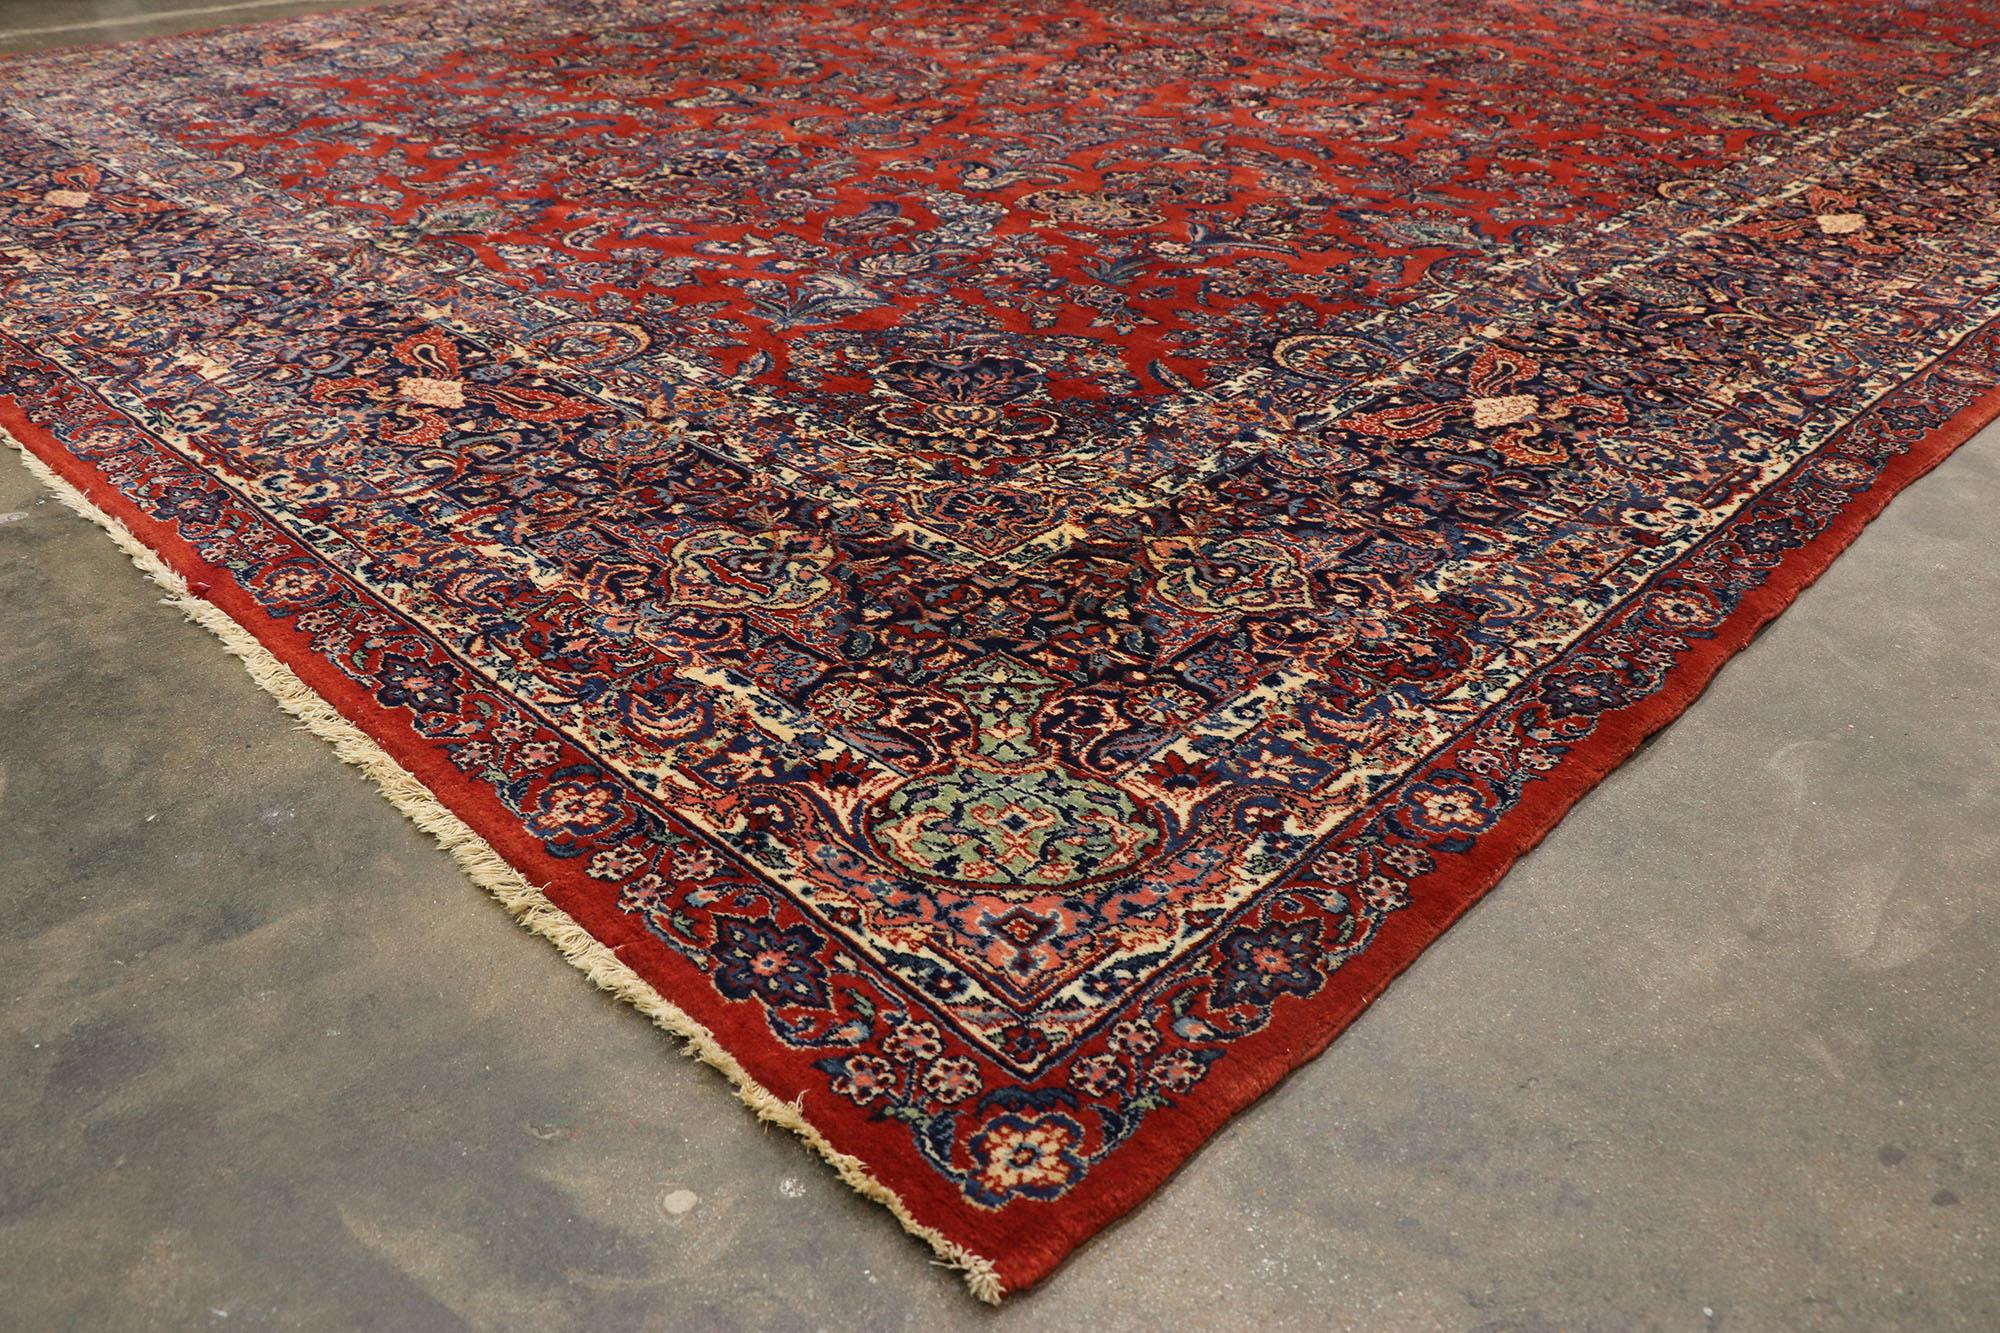 19th Century 1890s Oversized Antique Persian Qazvin Rug, Hotel Lobby Size Carpet For Sale